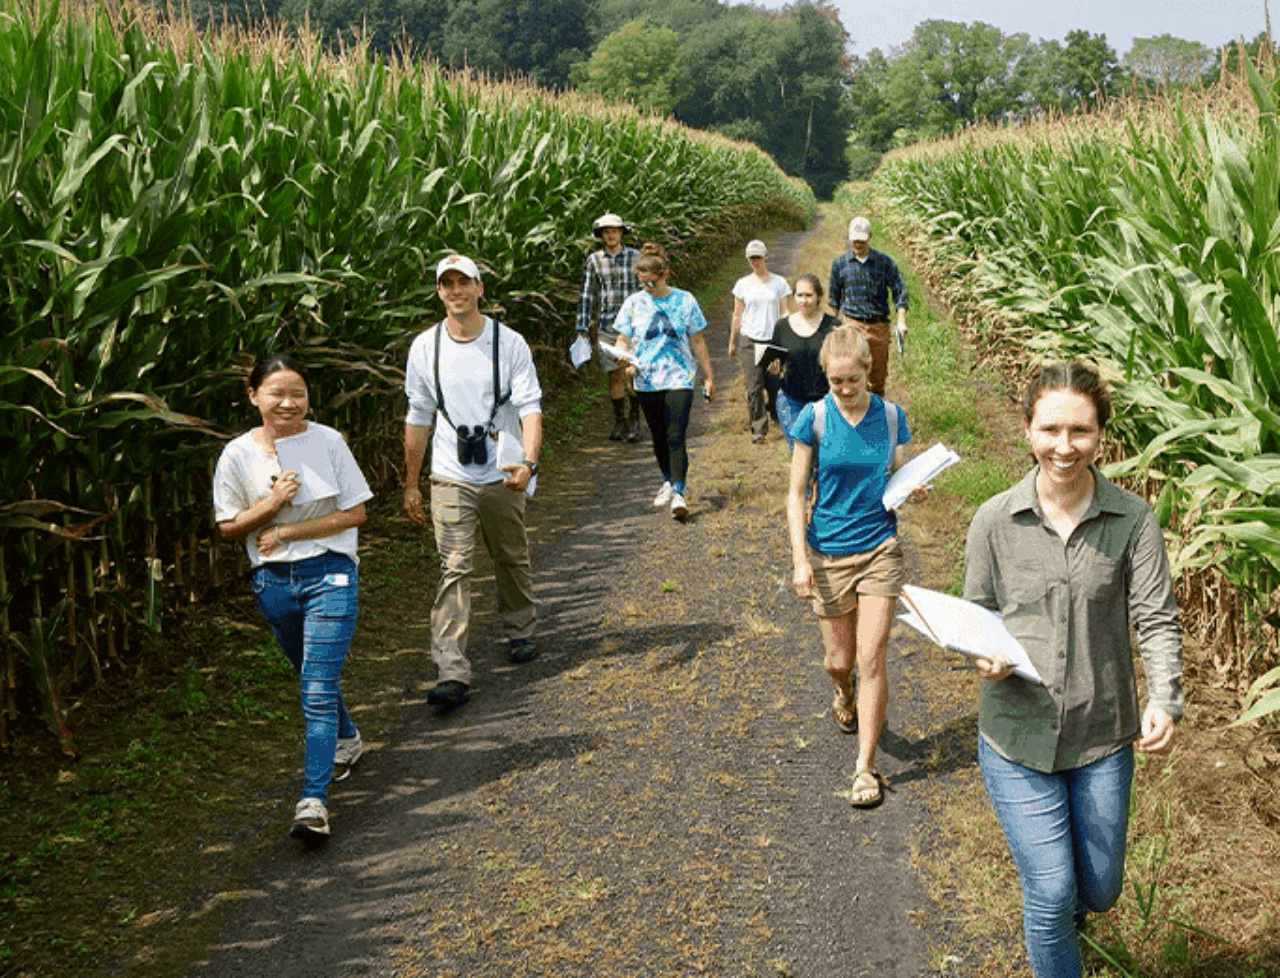 EplusD students walking with notebooks along a road surrounded by cornfields.